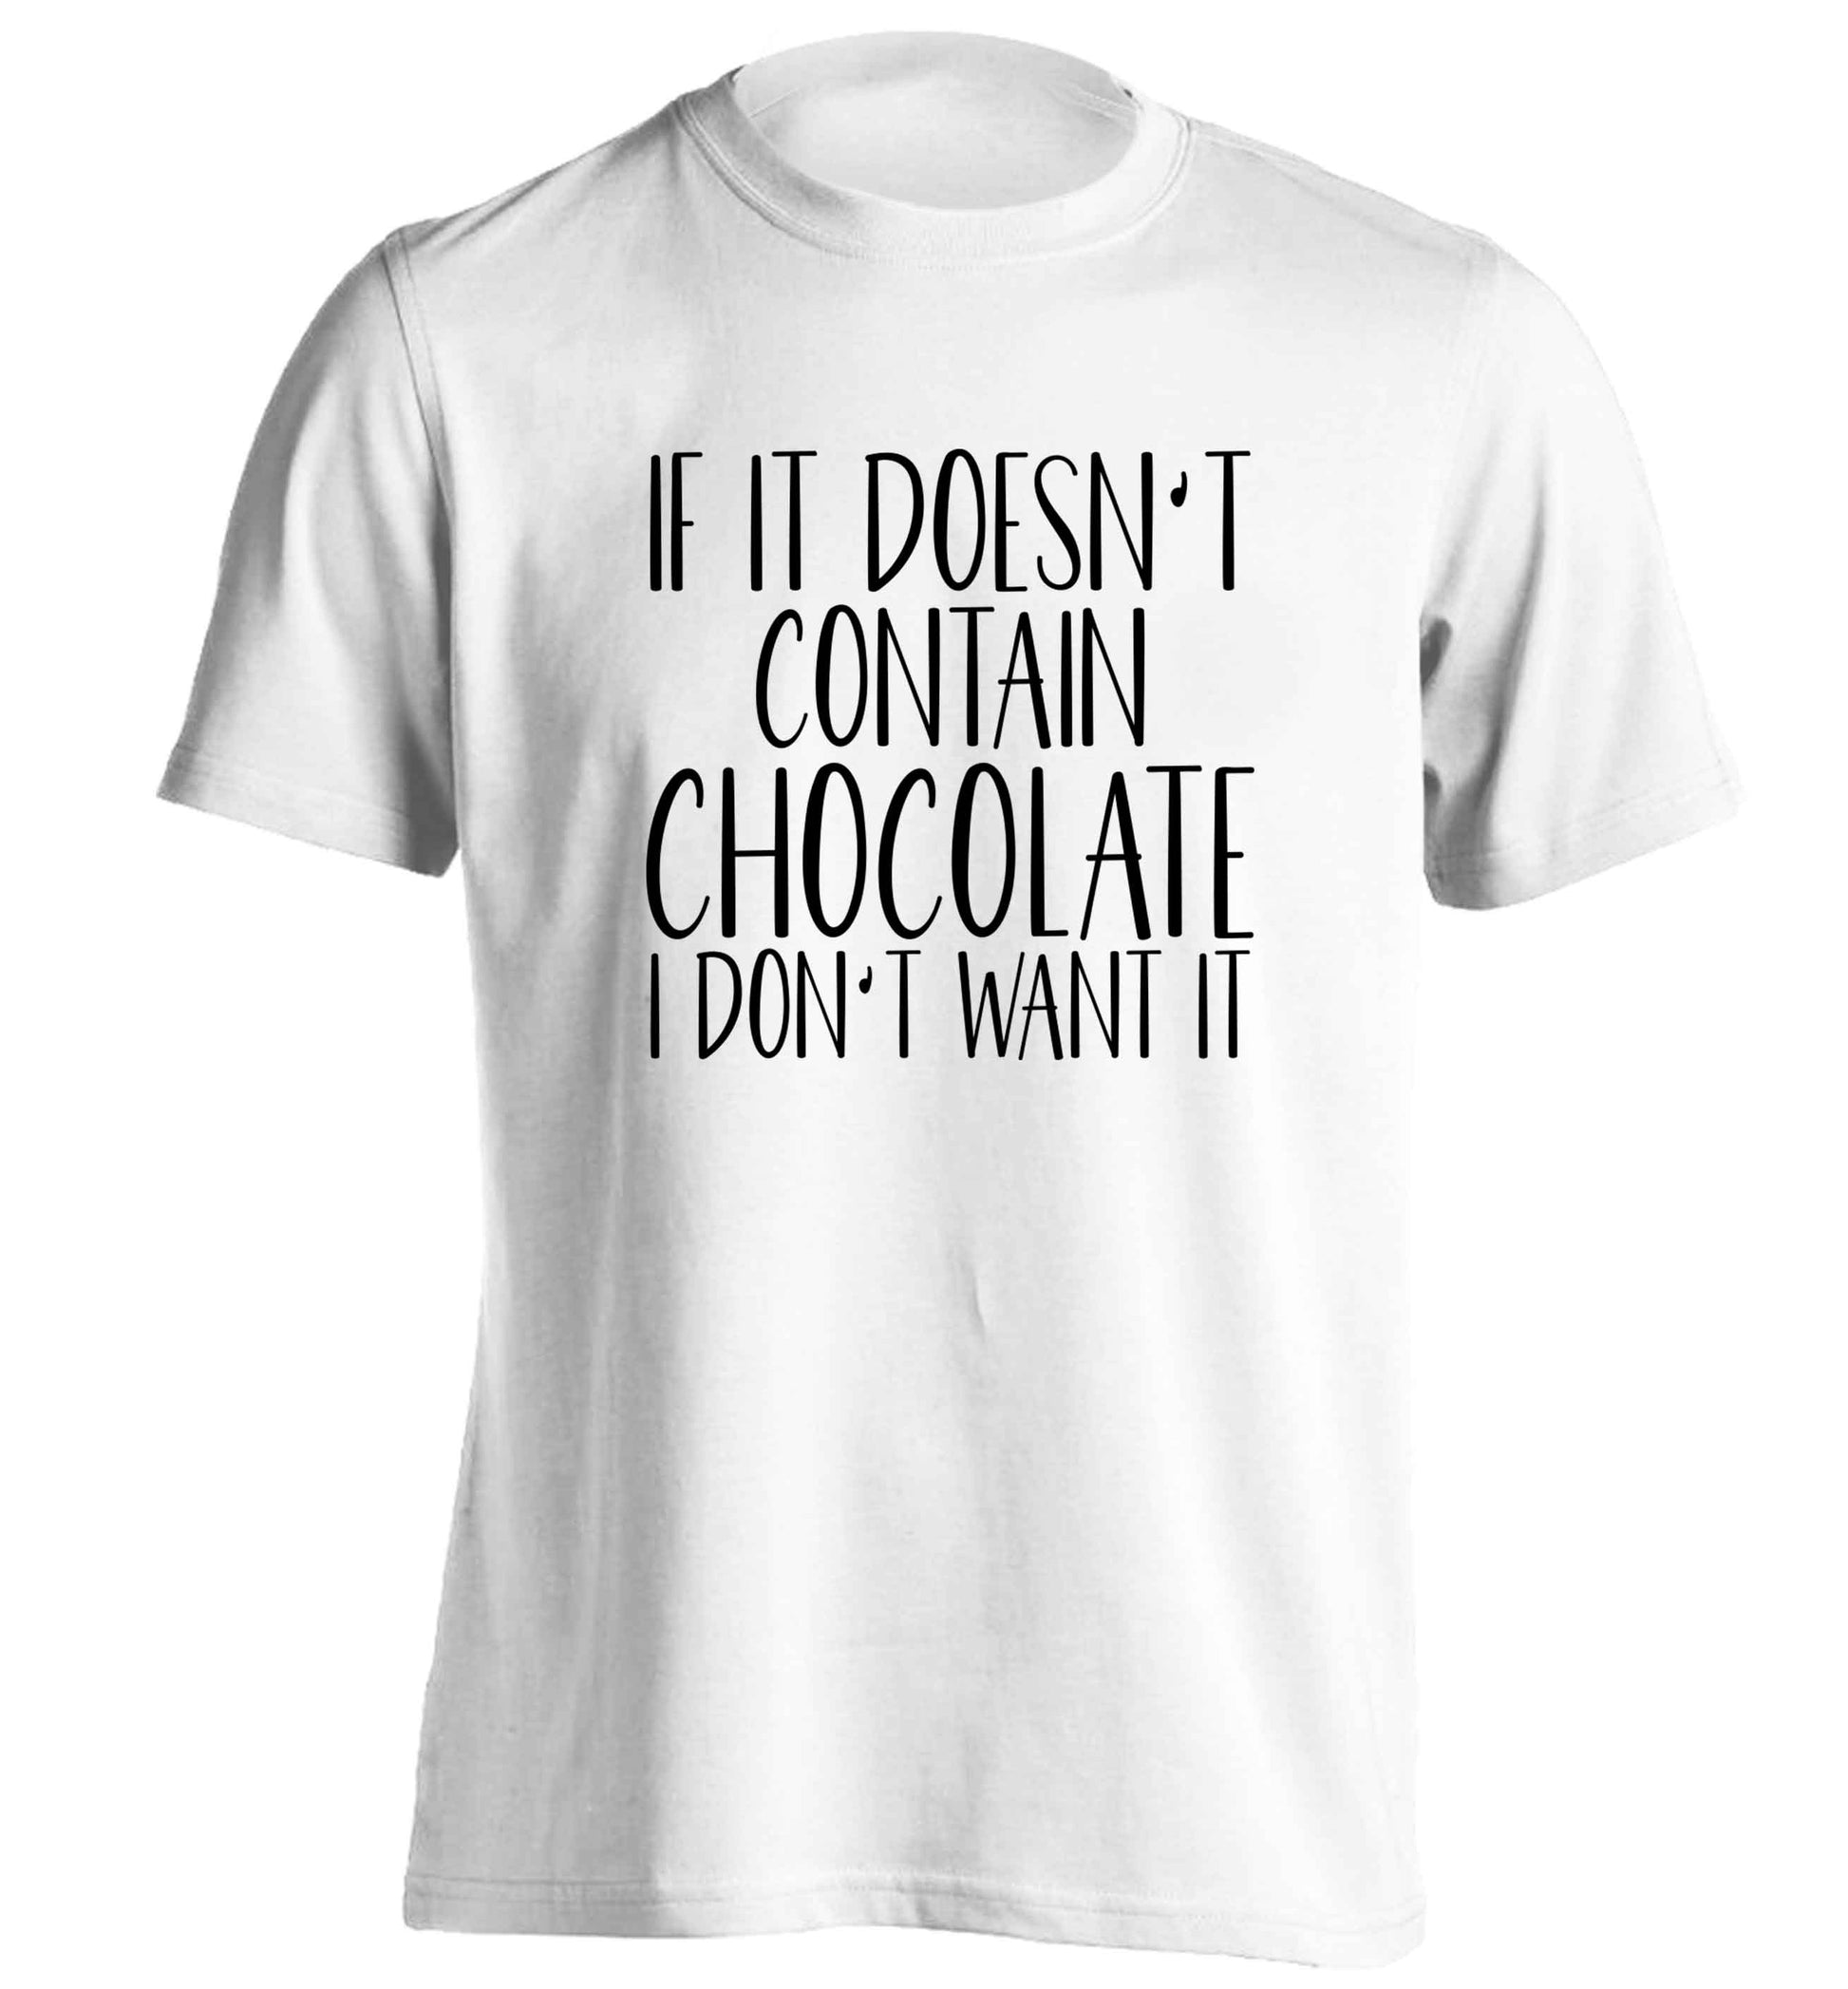 If it doesn't contain chocolate I don't want it adults unisex white Tshirt 2XL